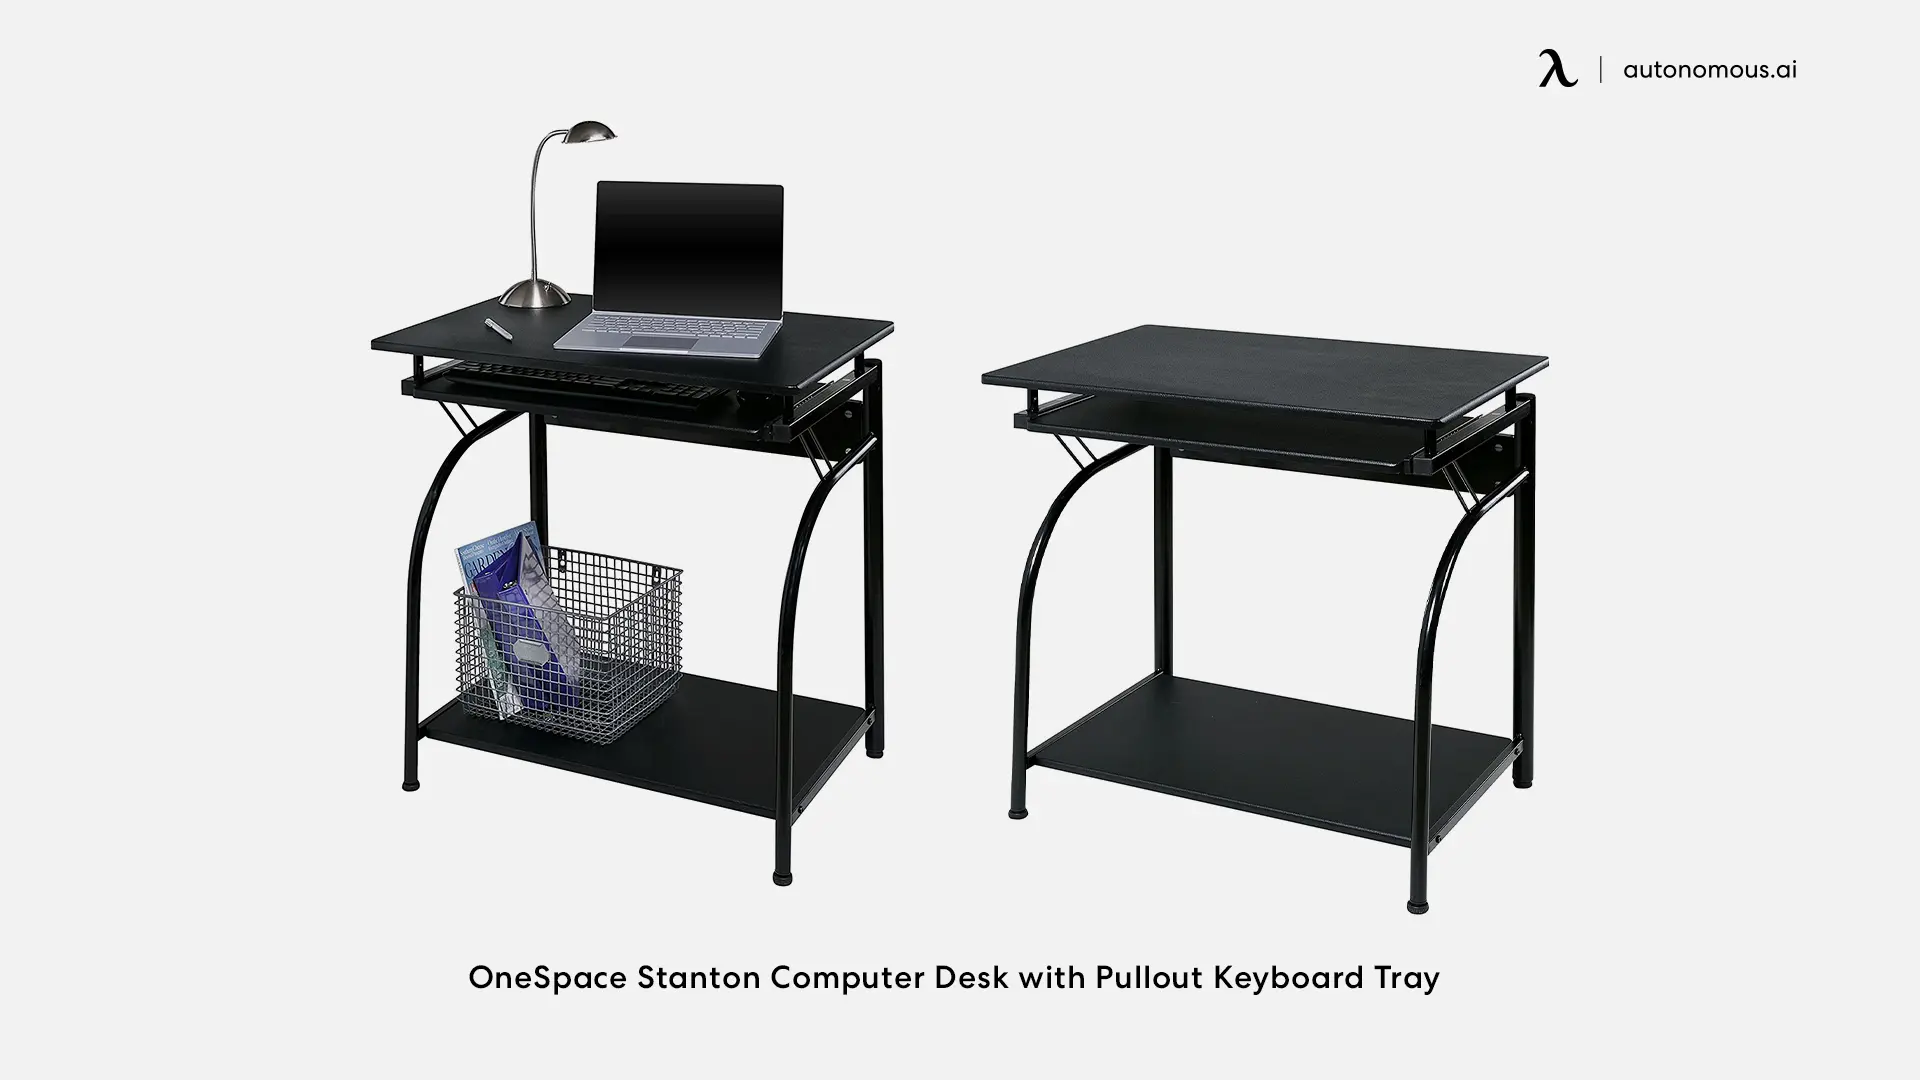 OneSpace Stanton Computer Desk with Pullout Keyboard Tray